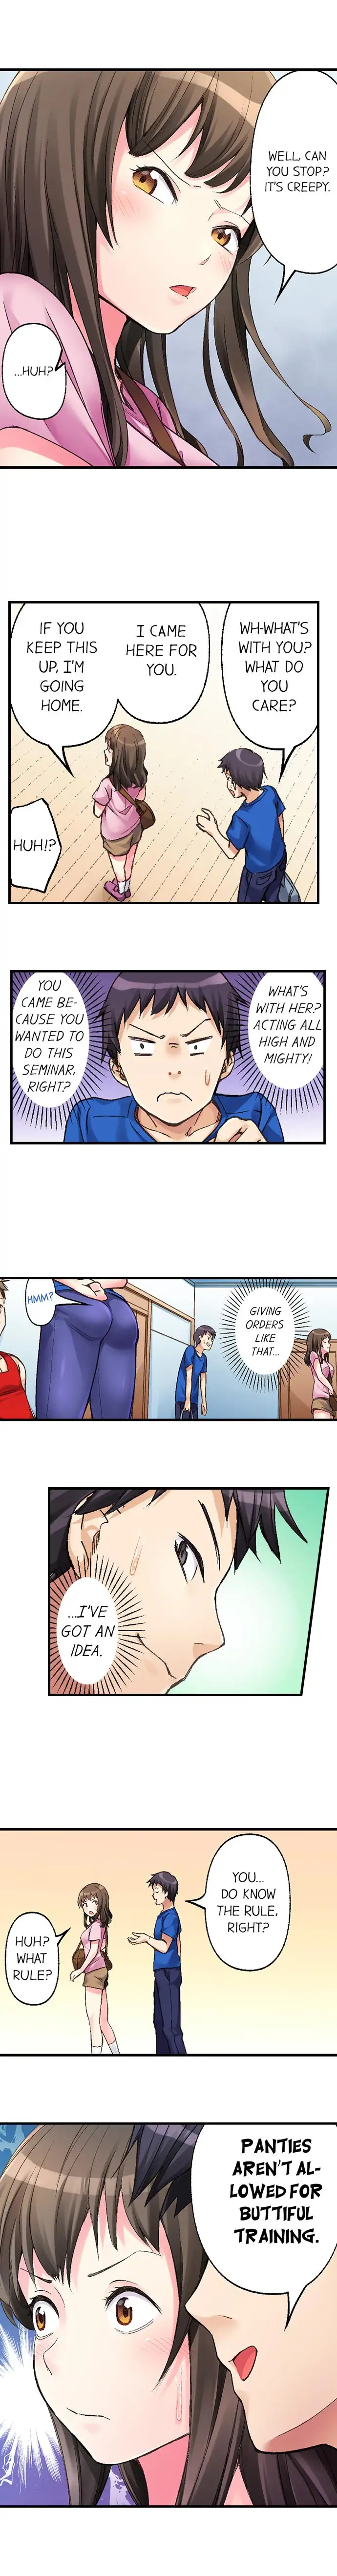 No Panty Booty Workout! - Chapter 1 Page 8